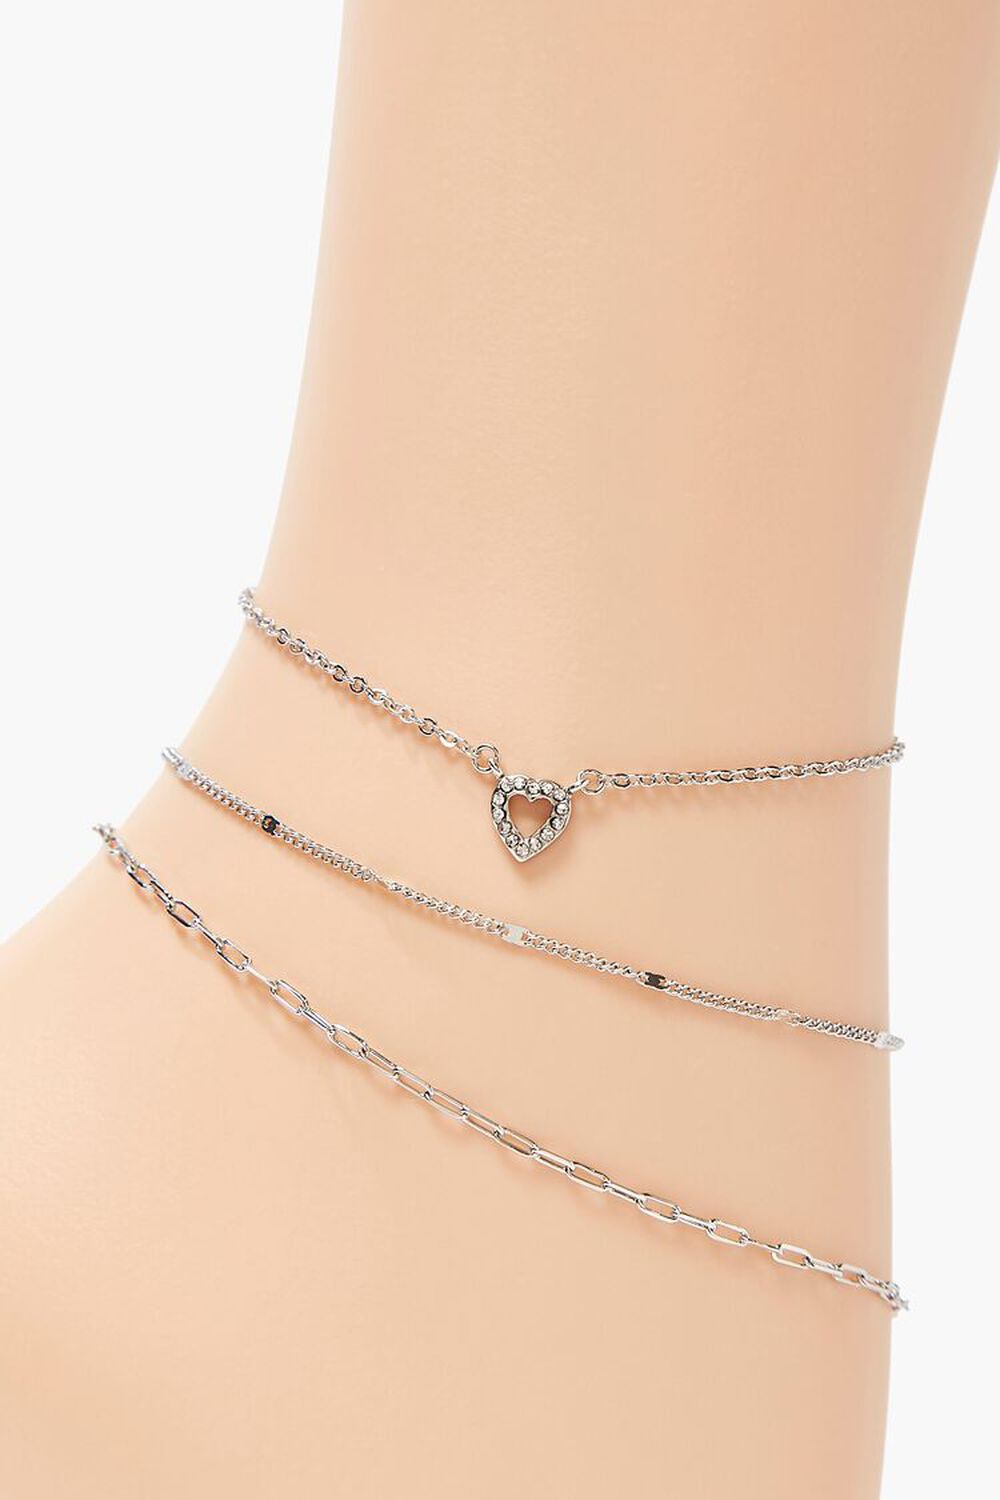 Heart Charm Chain Anklet Set, image 2